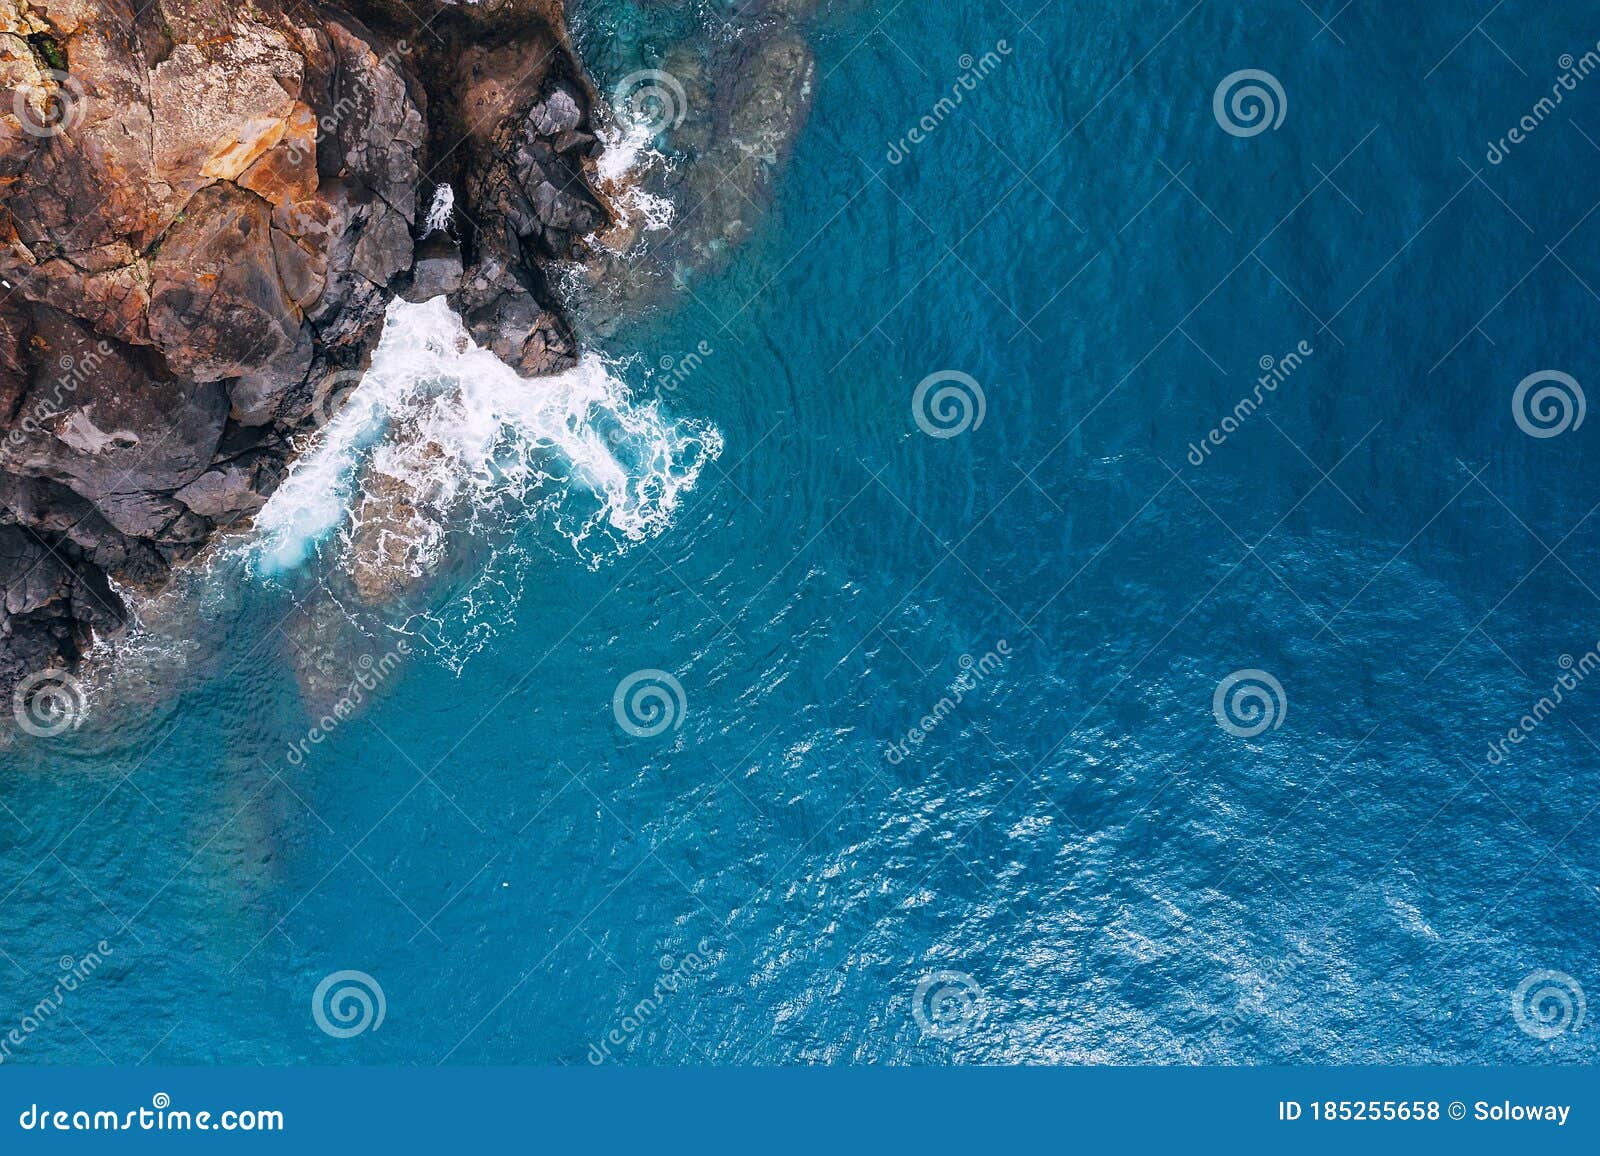 top aerial view of turquoise atlantic ocean water waves crashing on rocks on the portuguese madera island seashore